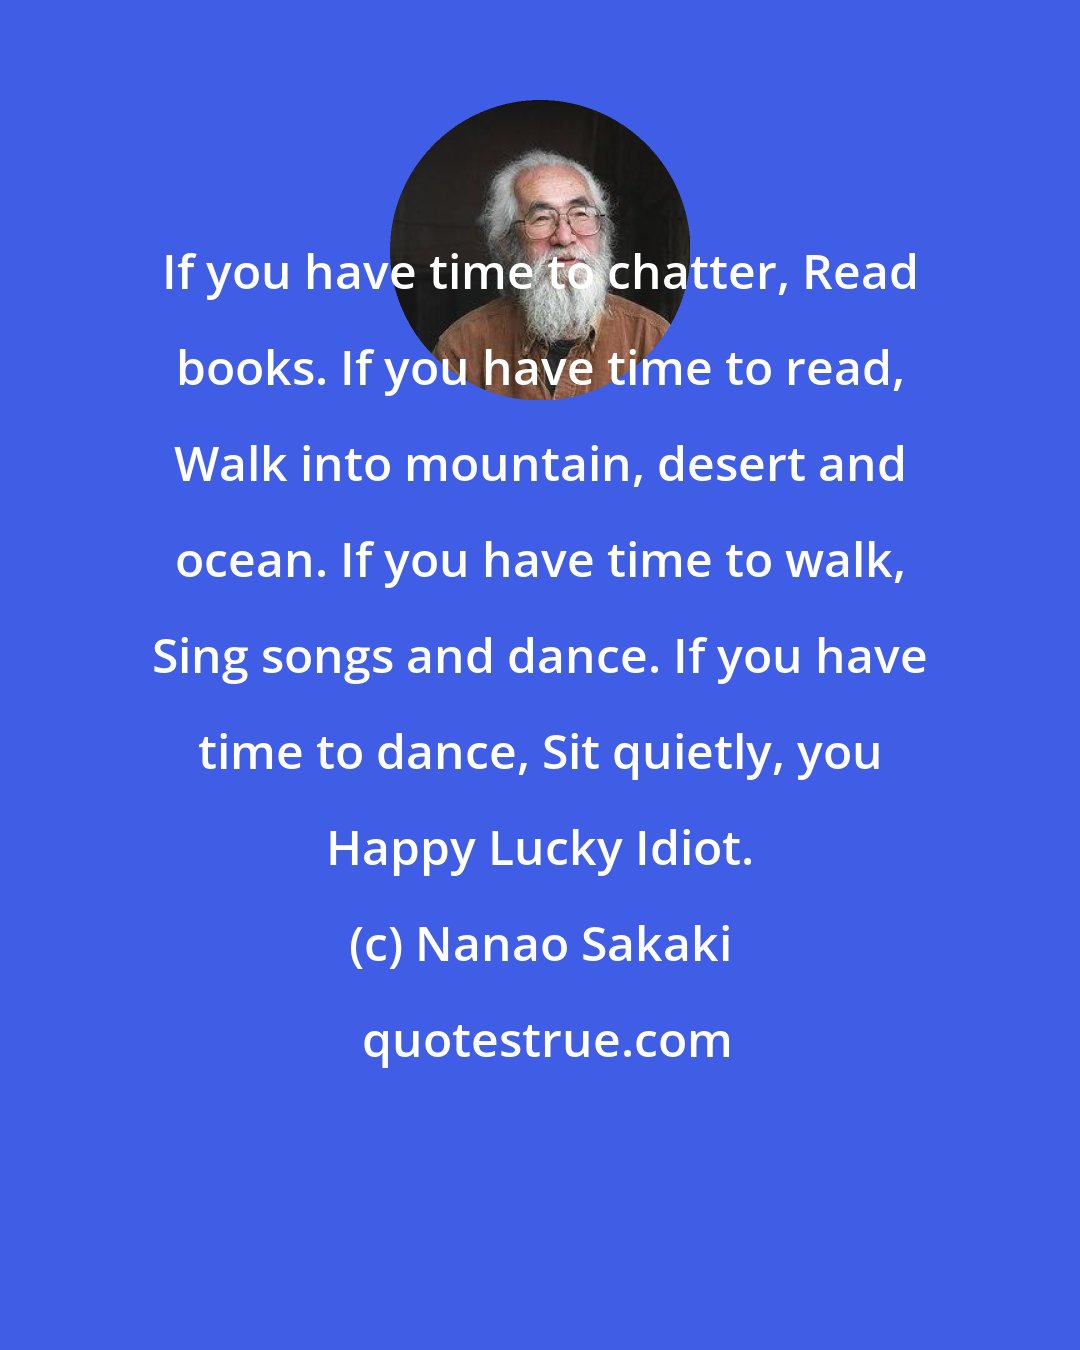 Nanao Sakaki: If you have time to chatter, Read books. If you have time to read, Walk into mountain, desert and ocean. If you have time to walk, Sing songs and dance. If you have time to dance, Sit quietly, you Happy Lucky Idiot.